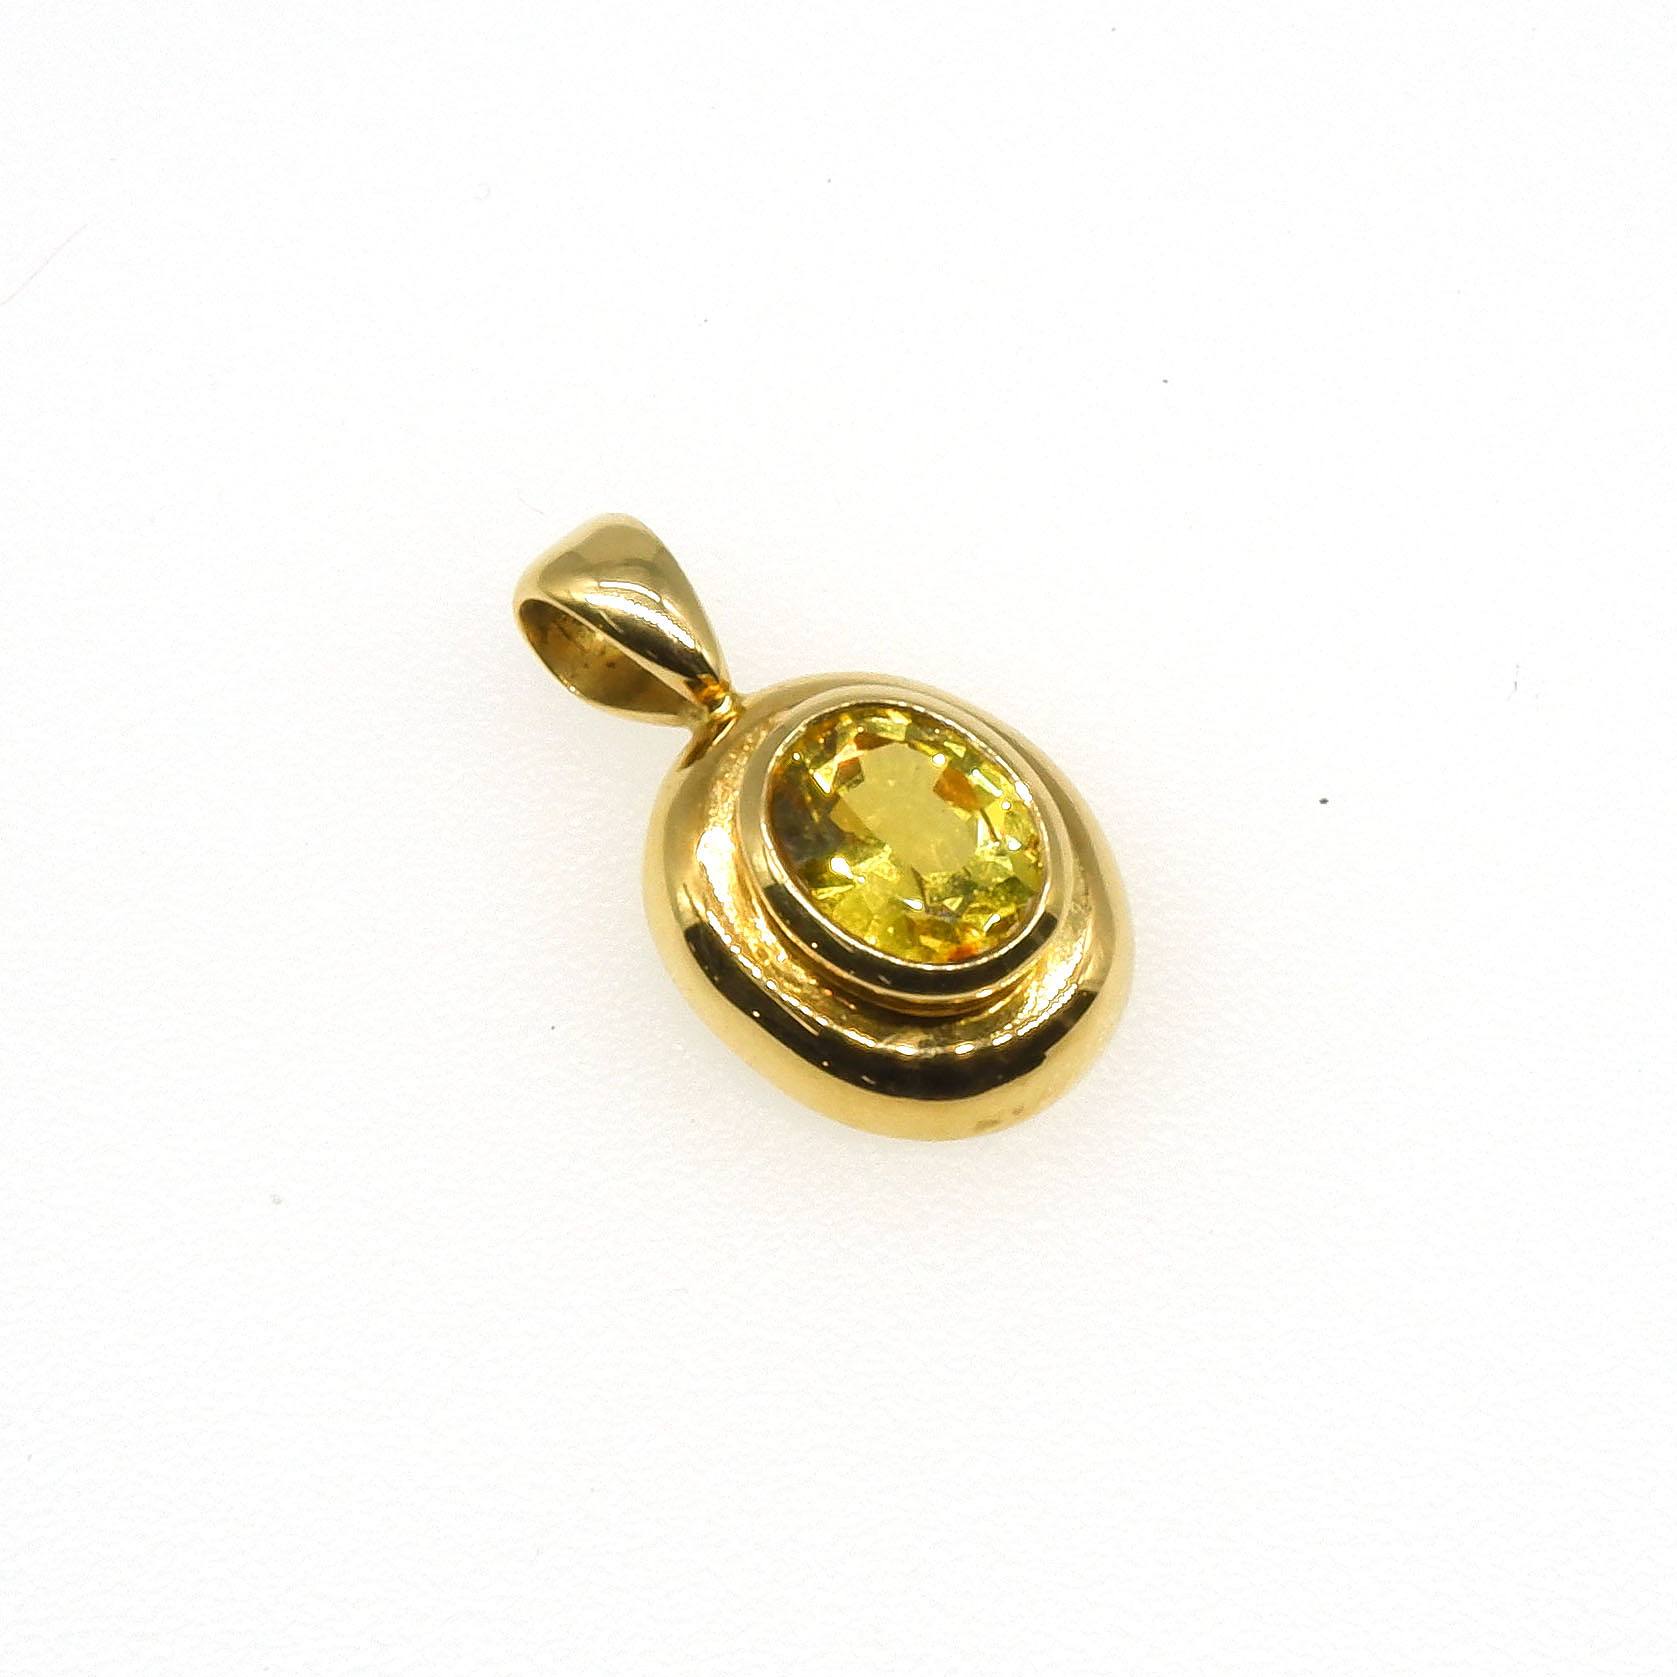 '18ct Yellow Gold Pendant with Oval Greenish Yellow Sapphire'